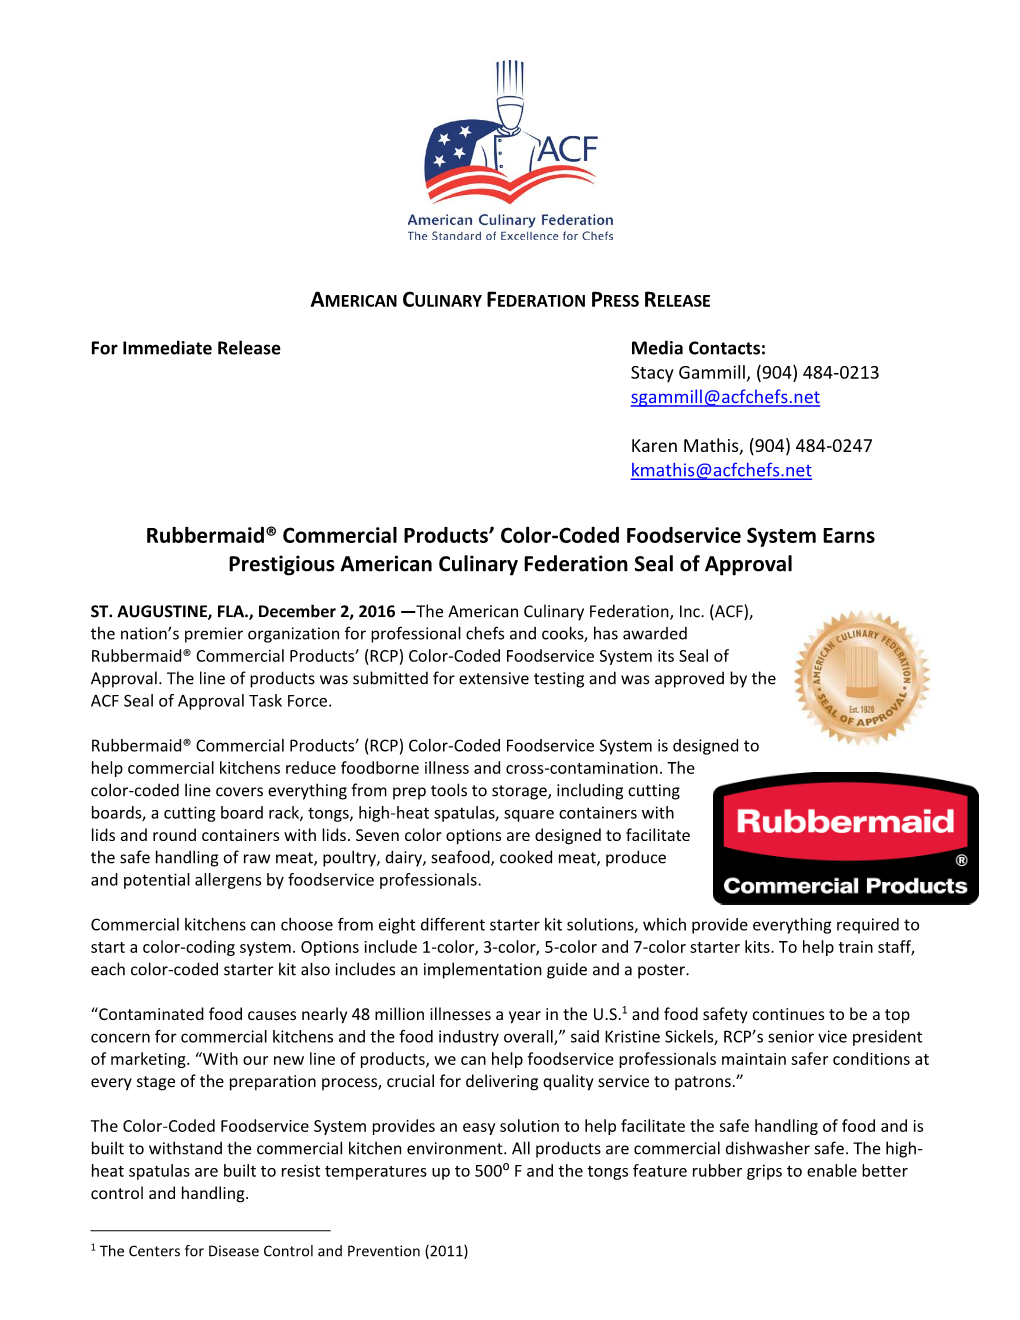 Rubbermaid® Commercial Products’ Color-Coded Foodservice System Earns Prestigious American Culinary Federation Seal of Approval